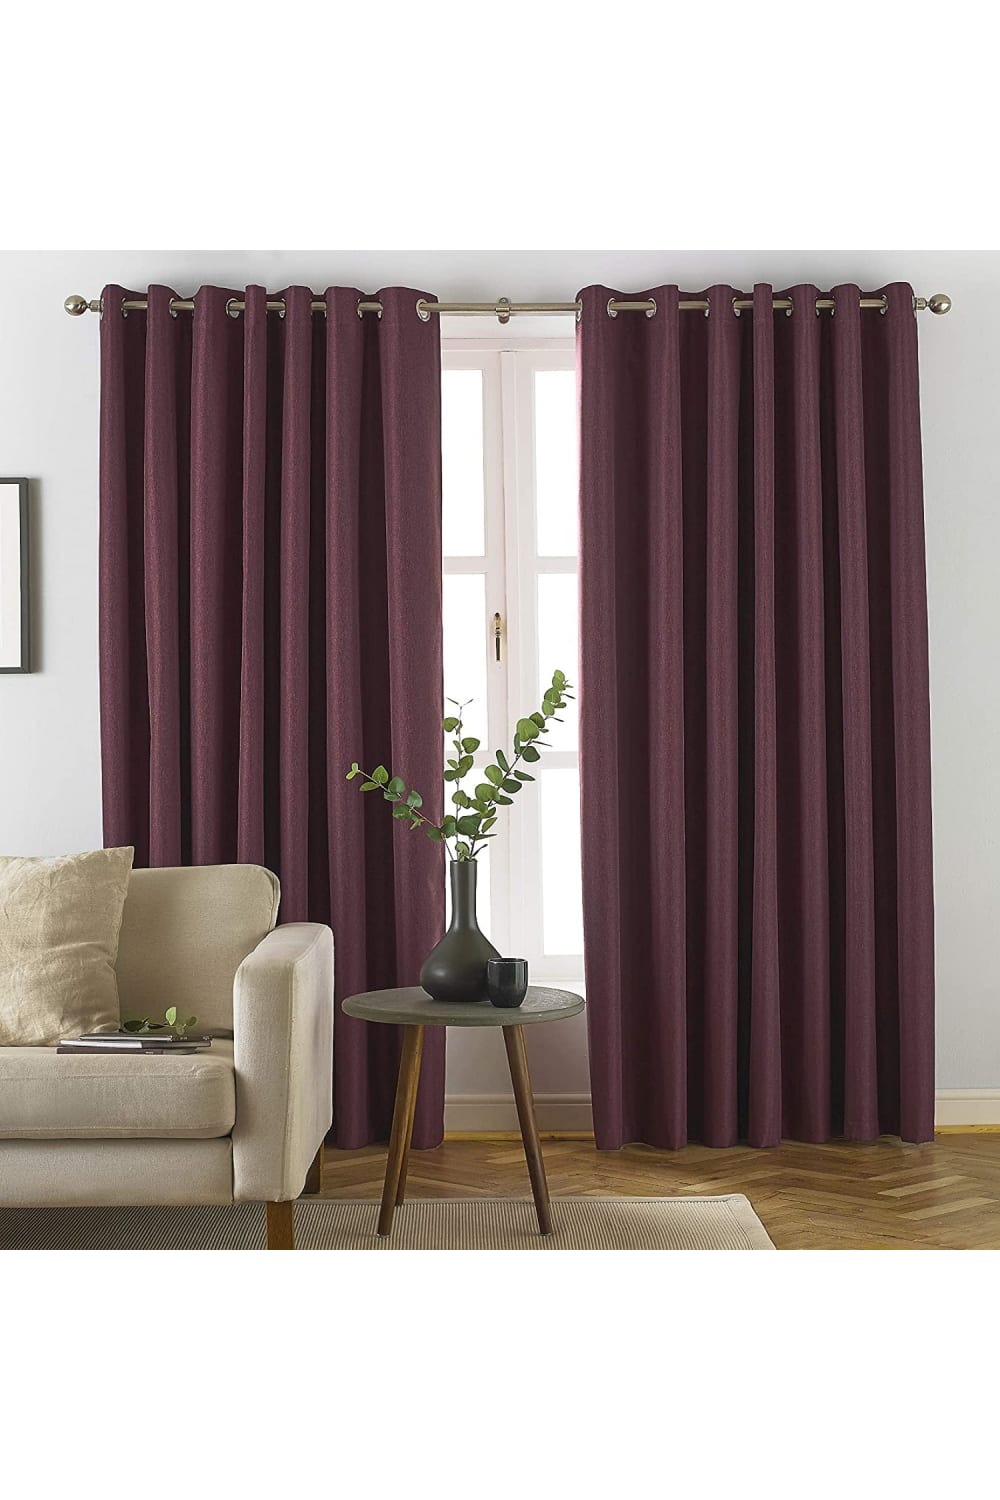 Furn Moon Eyelet Curtains (Red) (90in x 54in)